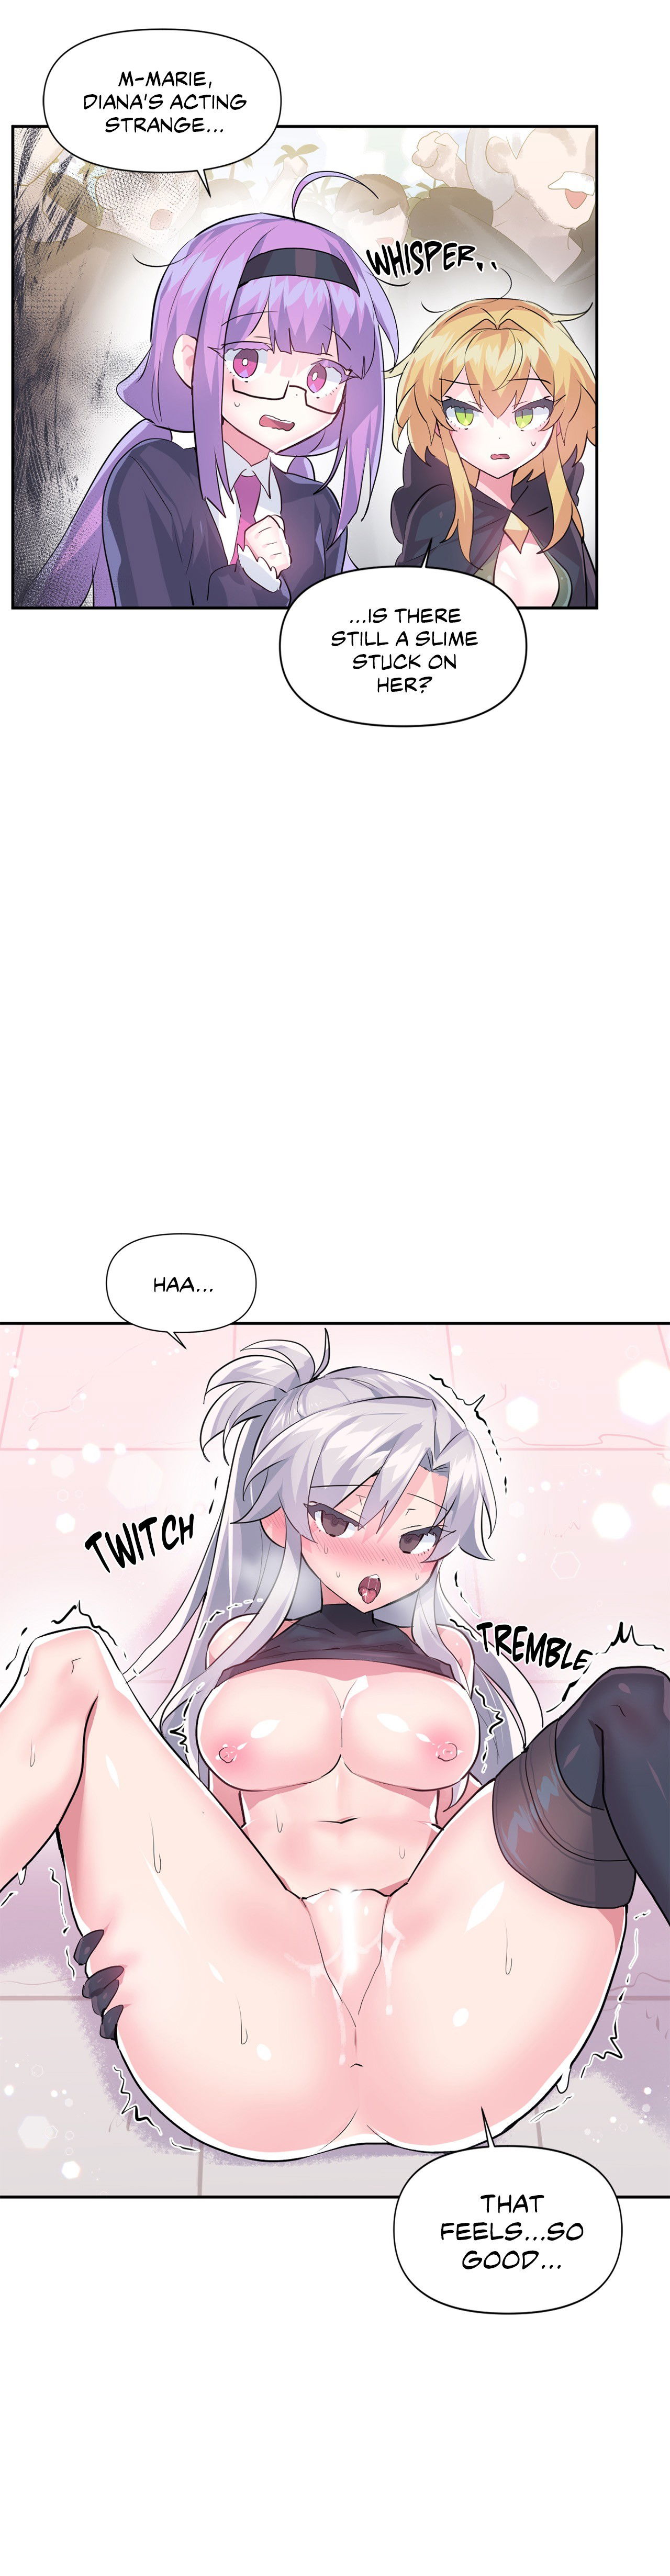 log-in-to-lust-a-land-chap-30-6